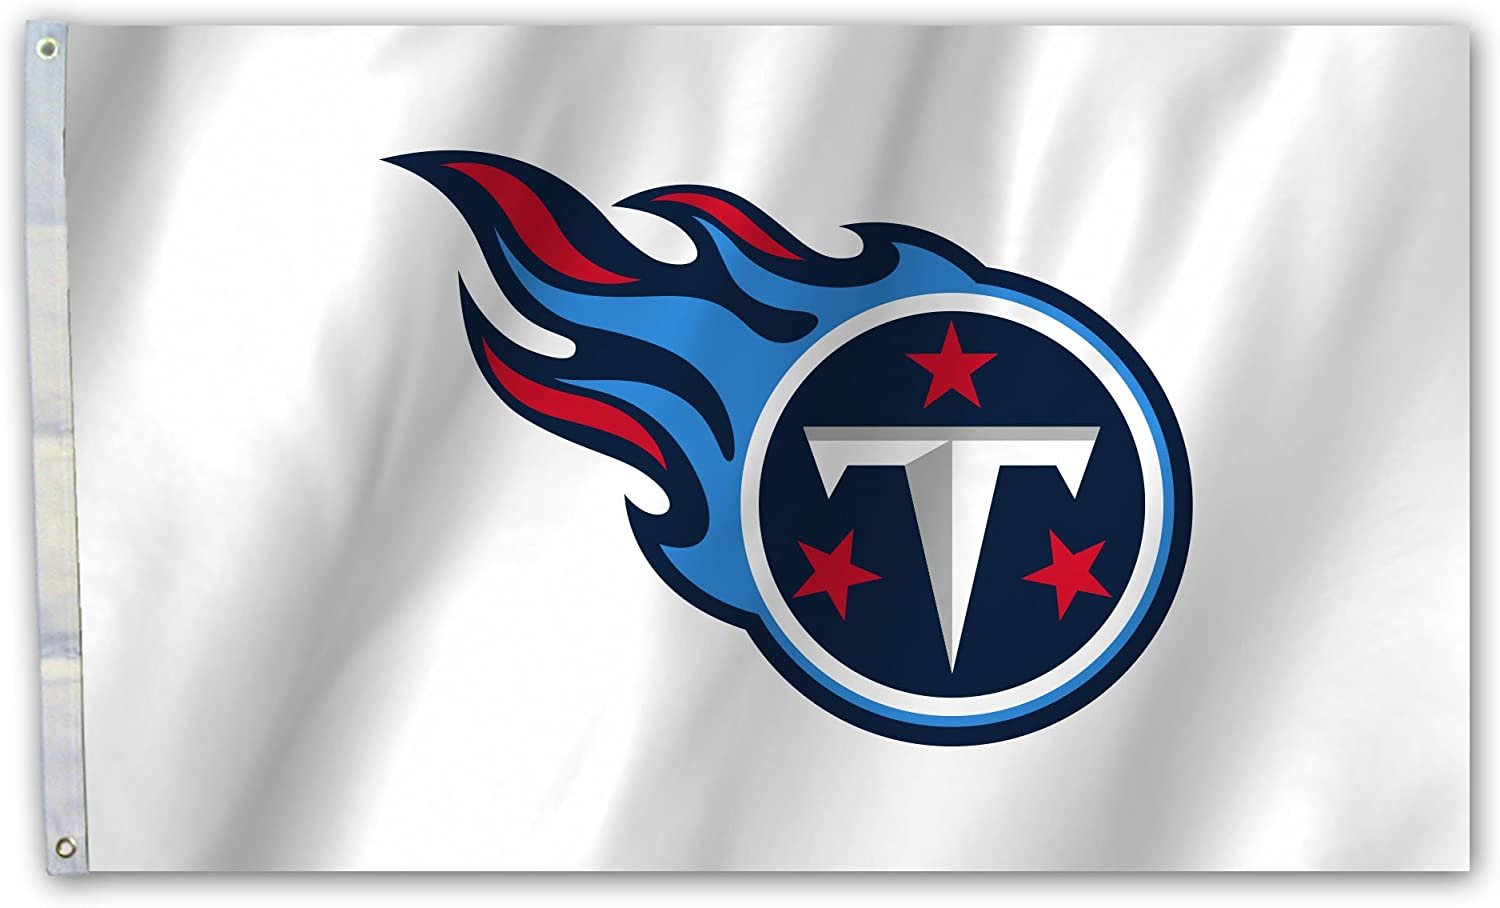 Tennessee Titans Premium 3x5 Feet Flag Banner, White Design, Metal Grommets, Outdoor Use, Single Sided